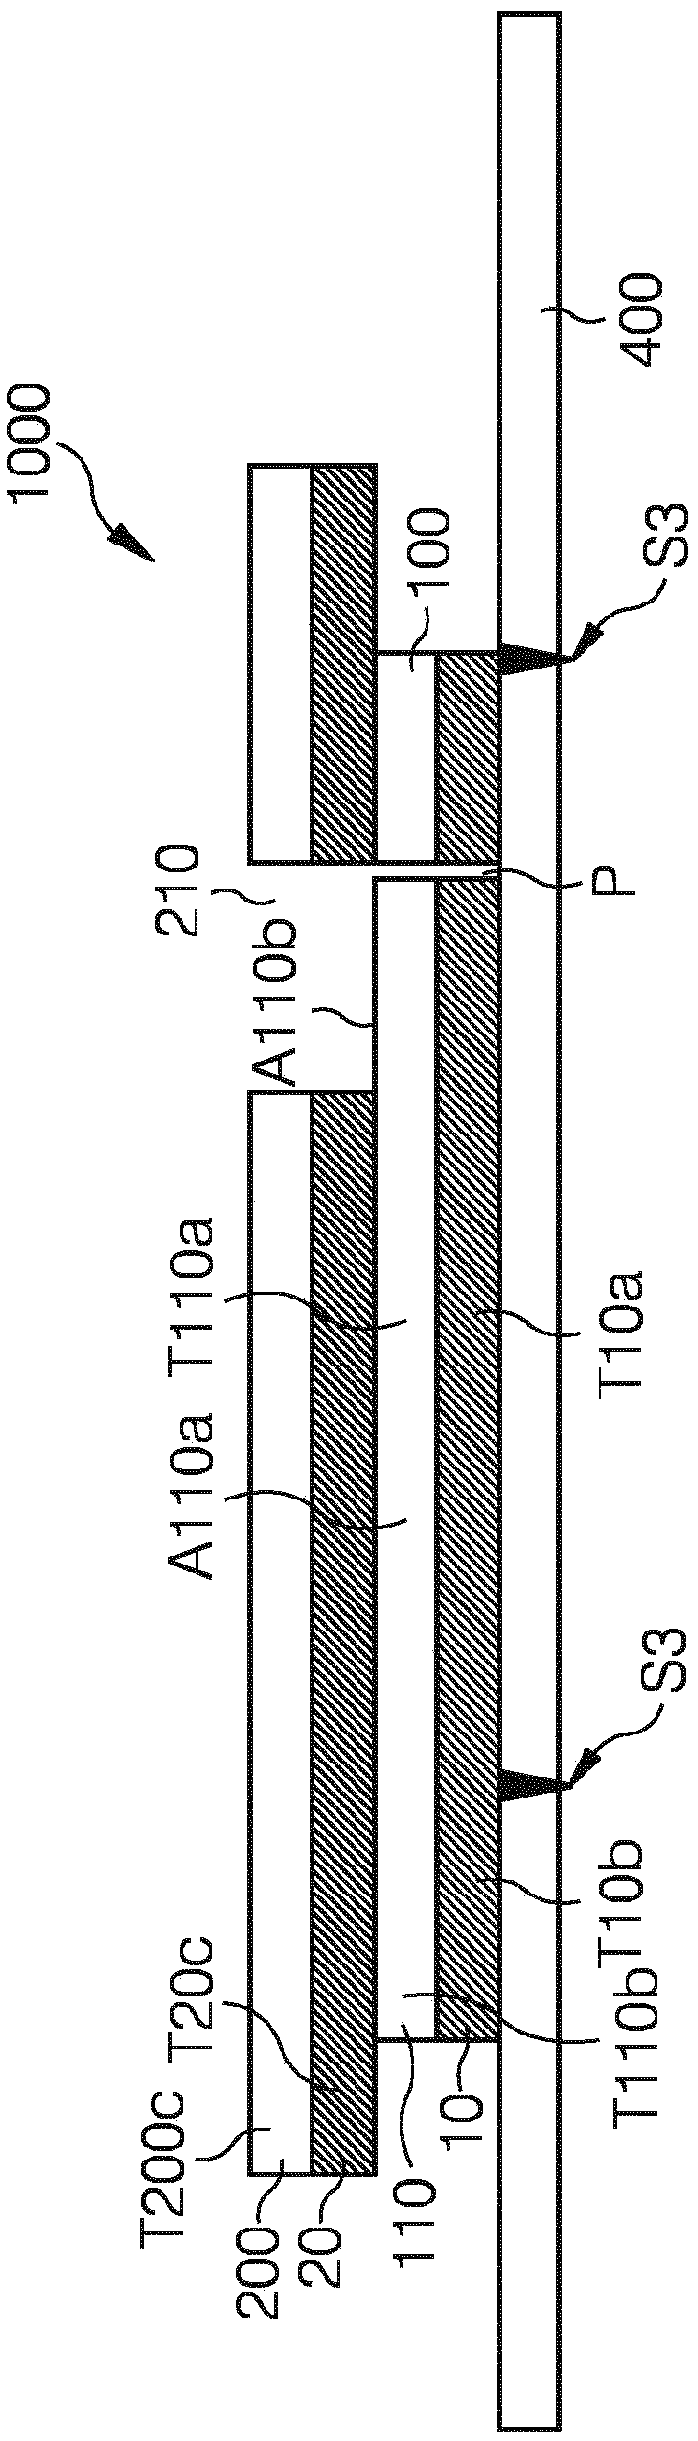 Electrically functional thin-film composite structures for application to substrates